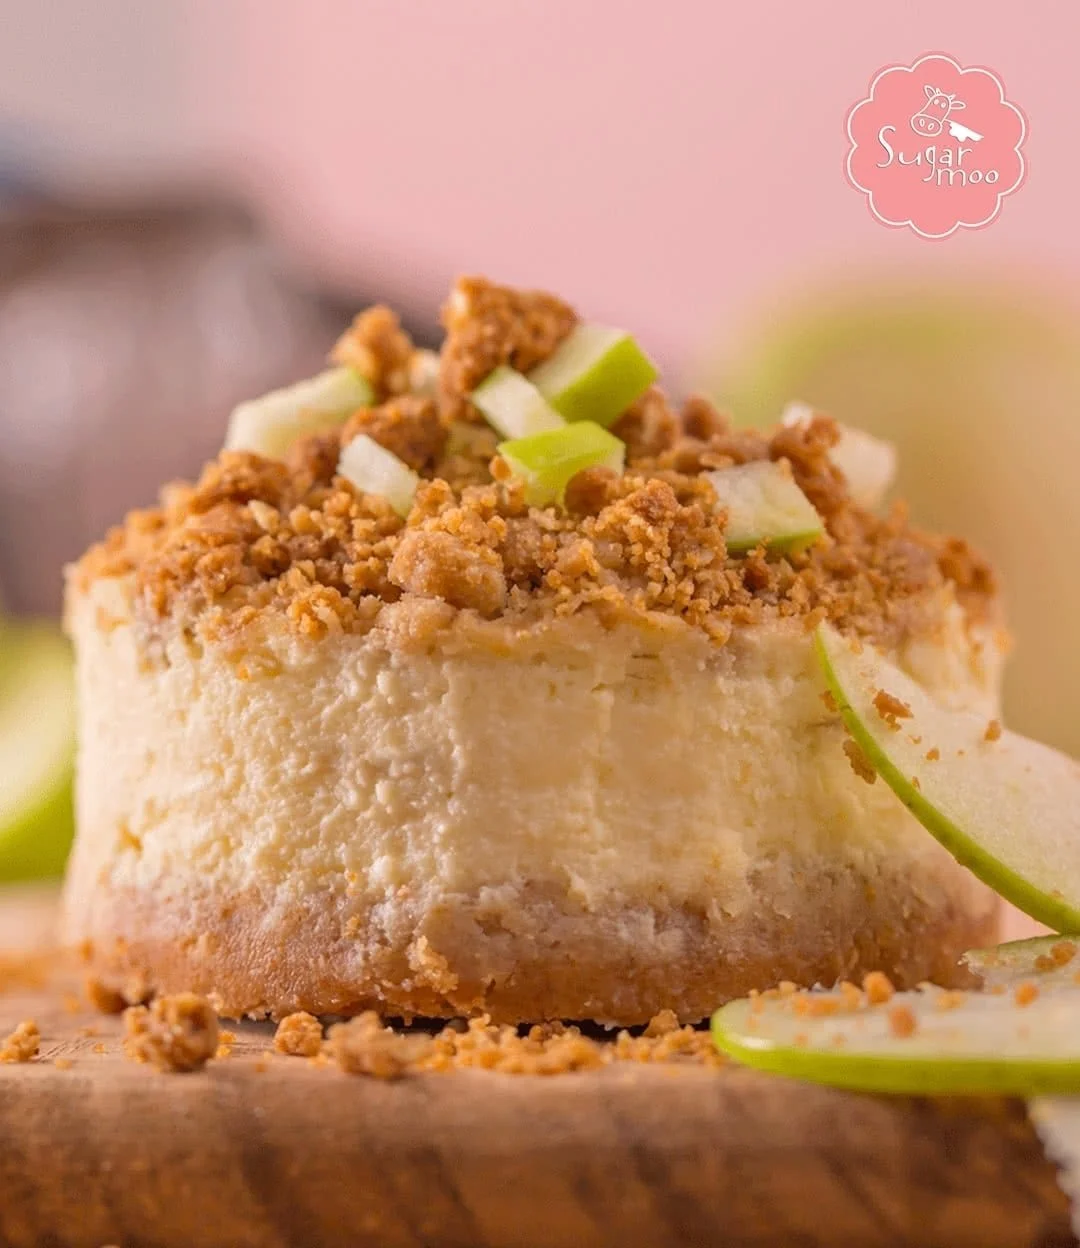 Twisted Apple Crumble by SugarMoo Desserts